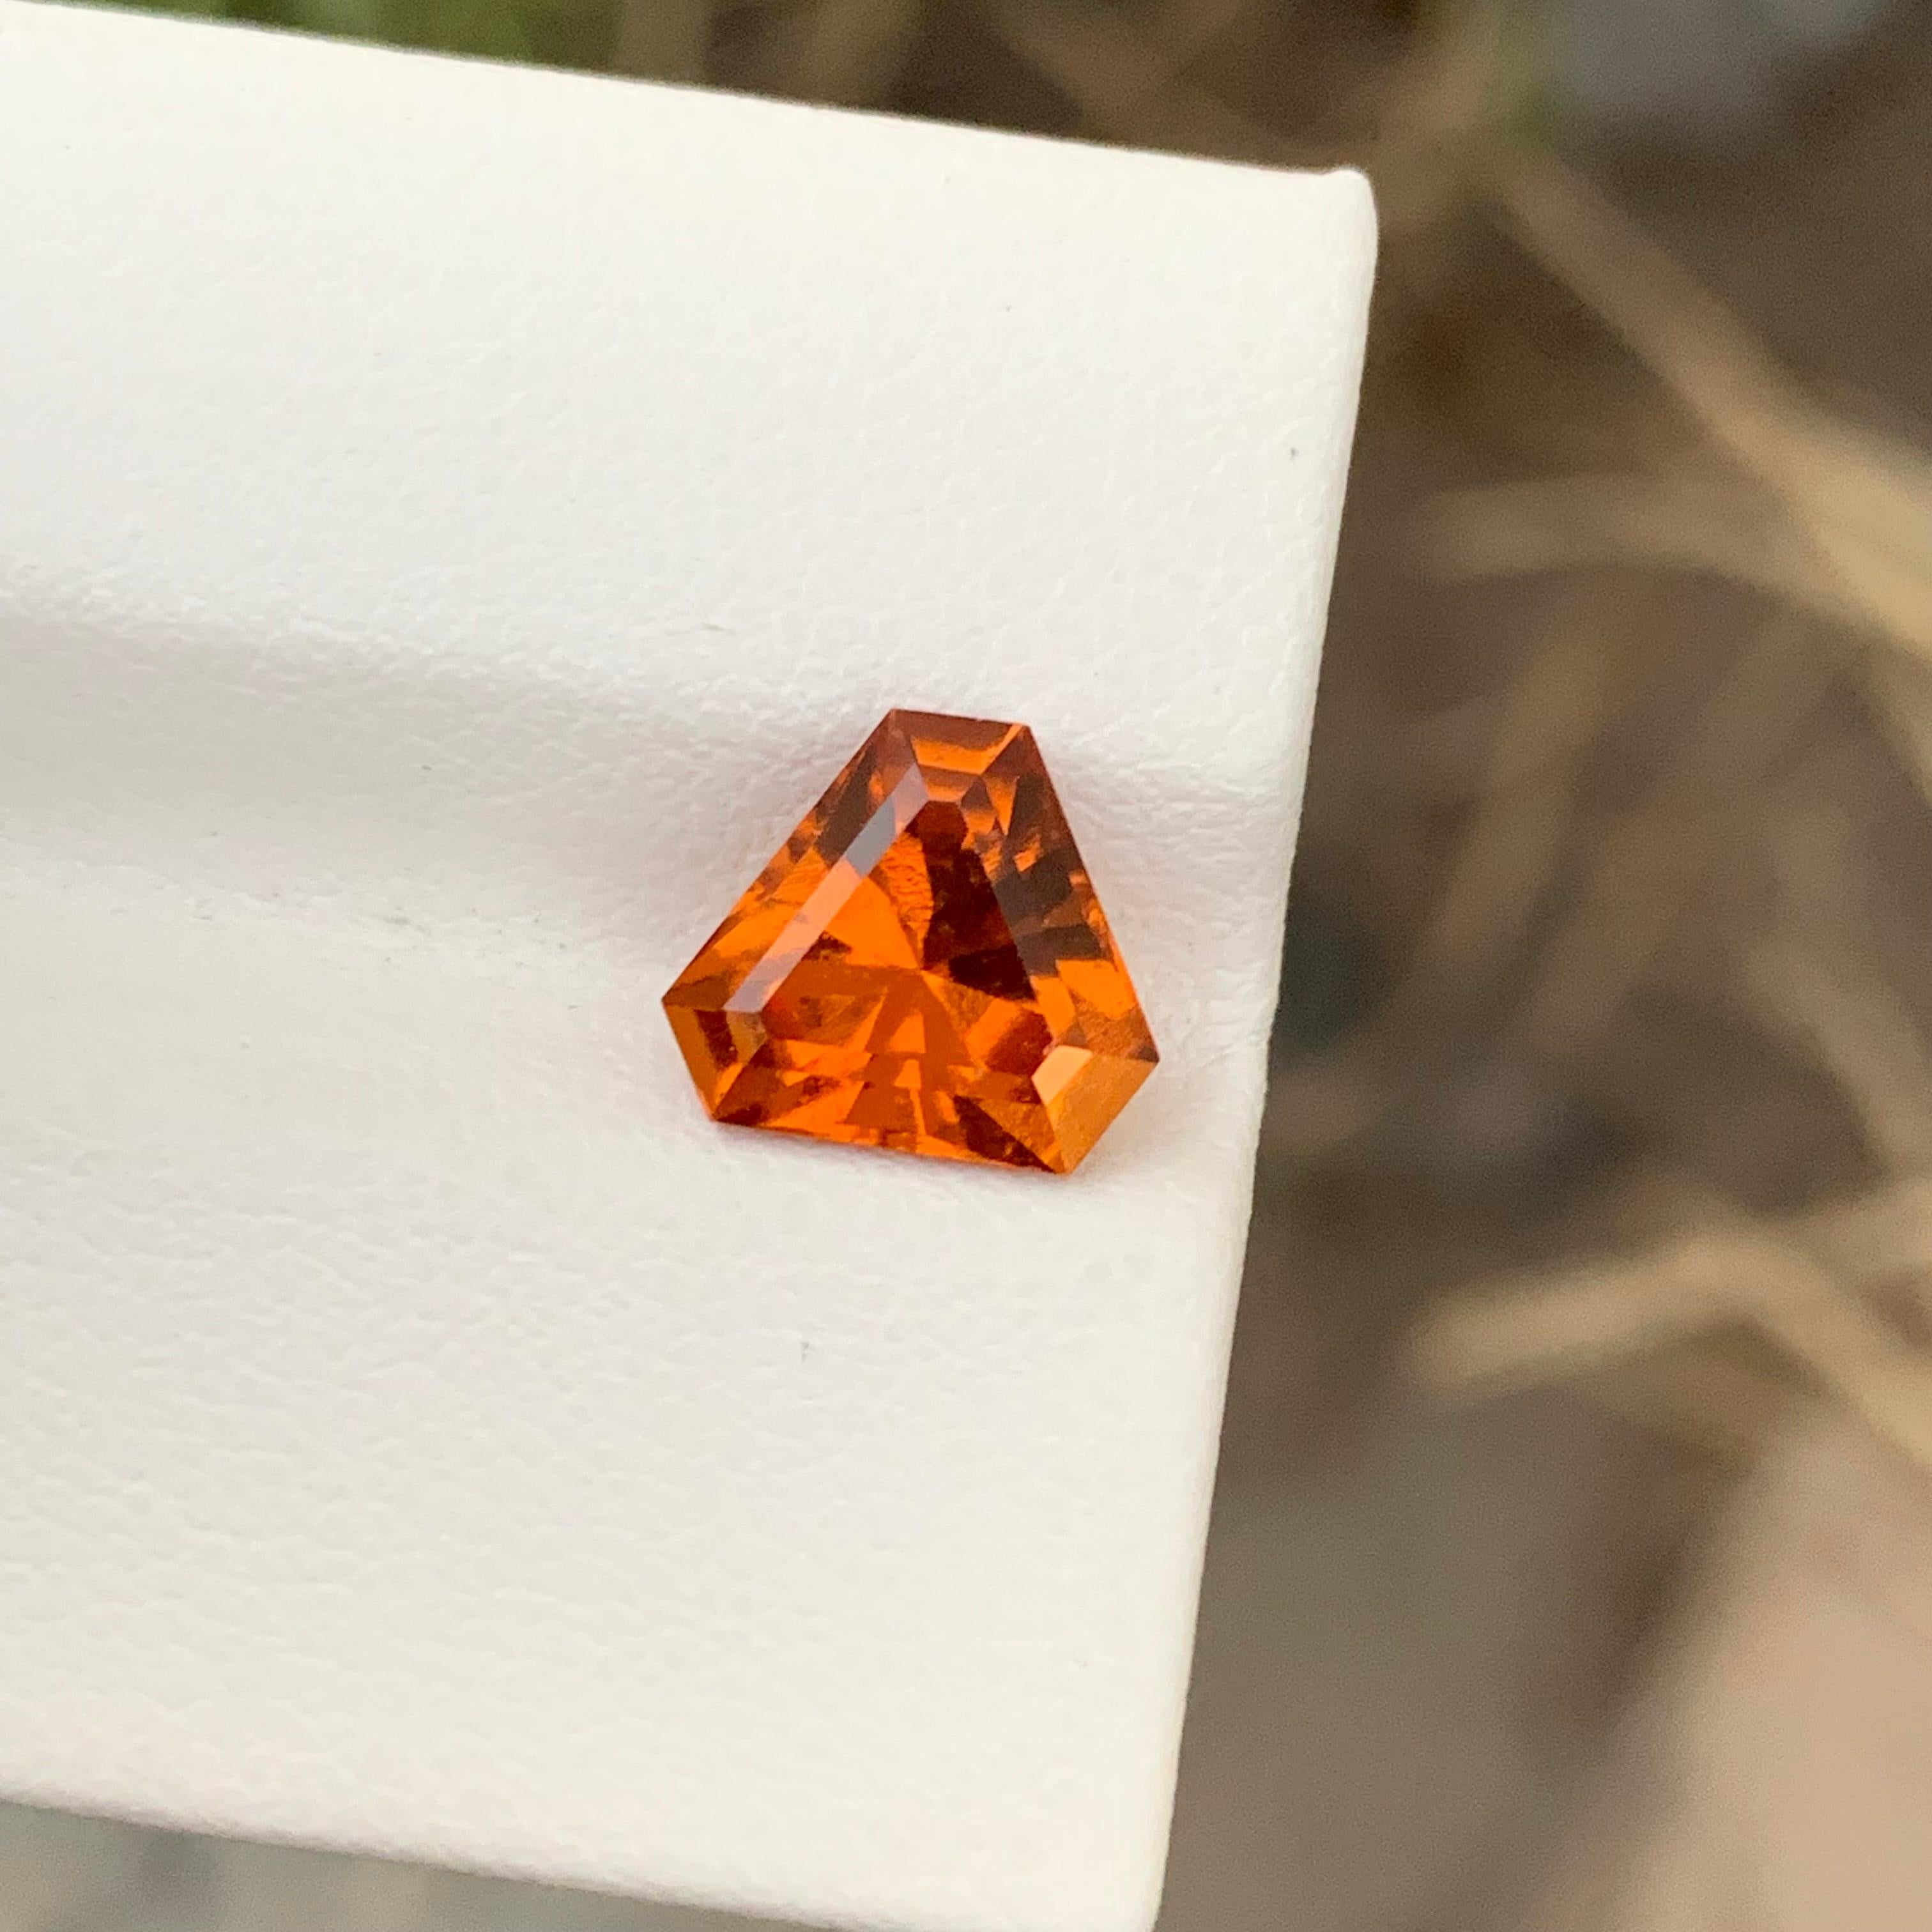 Loose Hessonite Garnet 
Weight: 2.40 Carats
Dimension: 8.2 x 8.2 x 5 Mm
Colour: Orange
Cut: Trillion 
Certificate: On Demand

Hessonite garnet, also known as cinnamon stone or gomedh, is a captivating gemstone renowned for its warm hues and